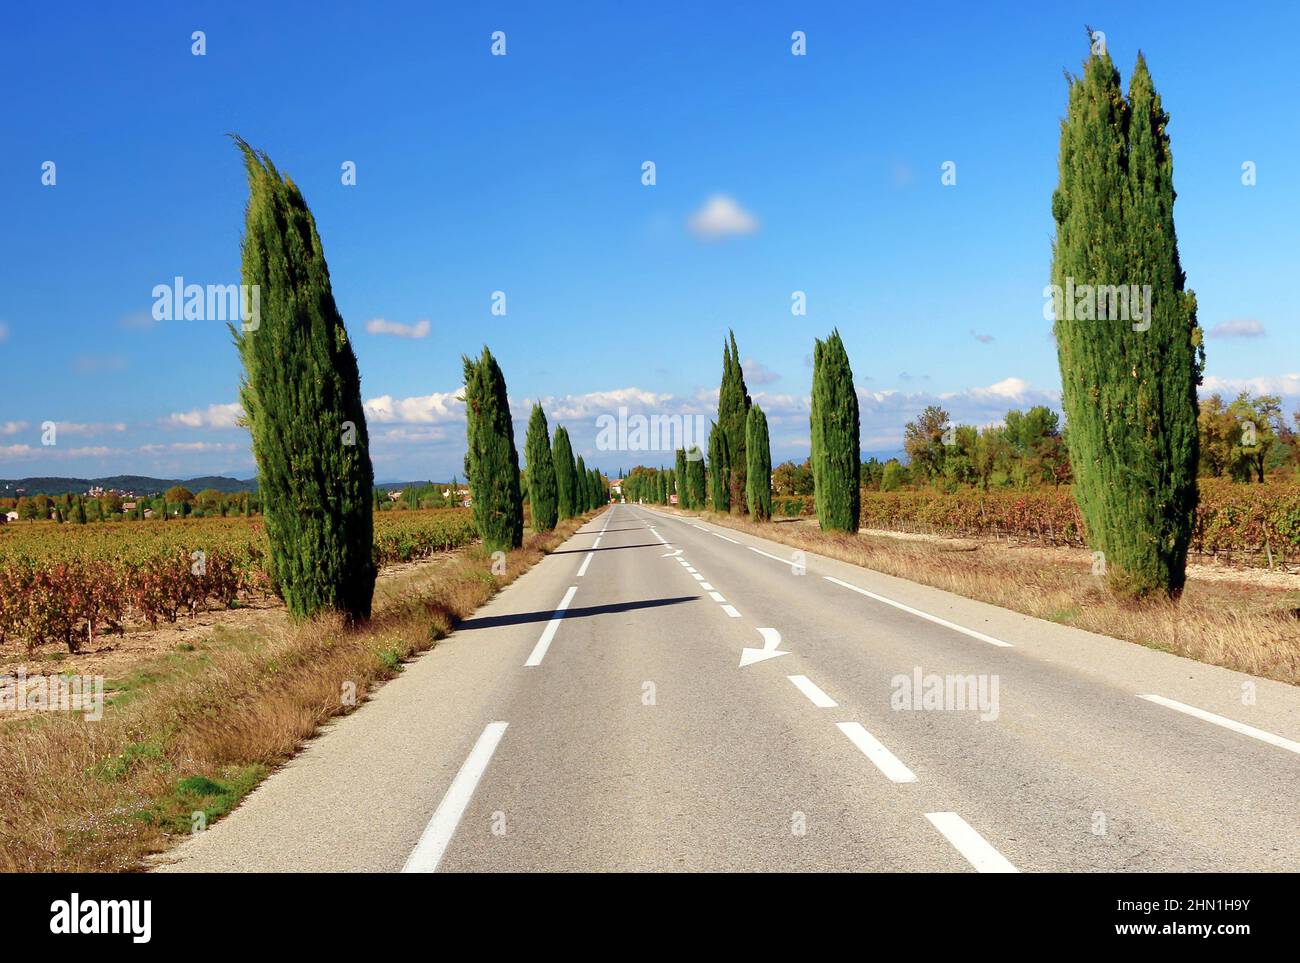 Provencal road lined with cypresses Stock Photo